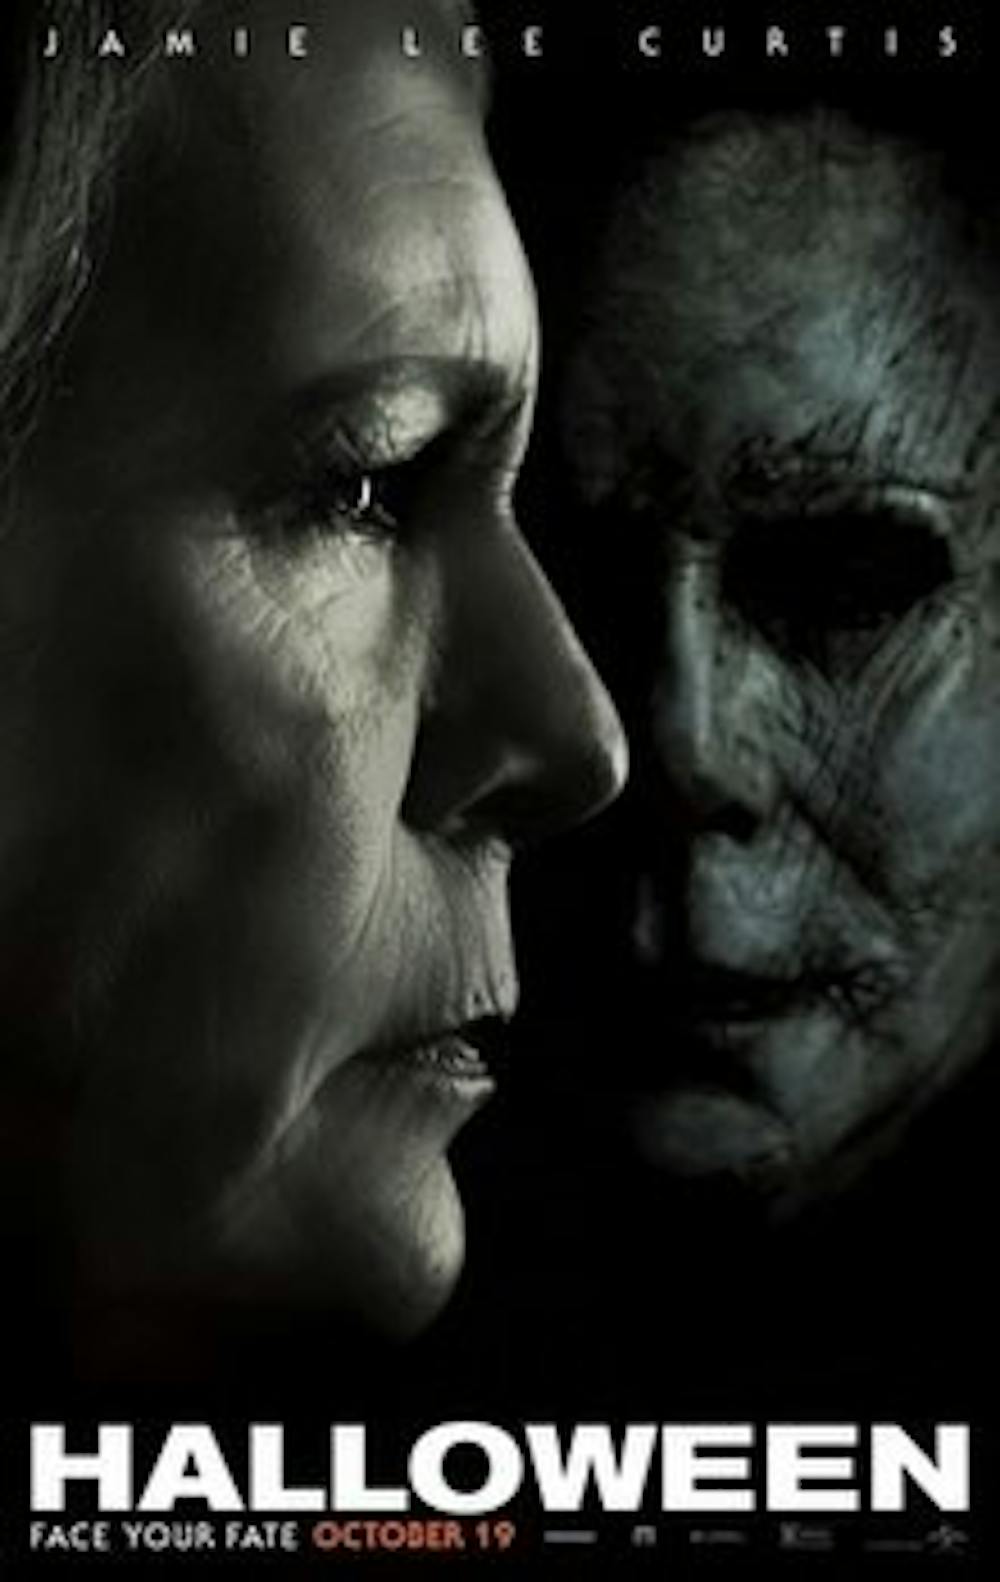 <p>“Halloween” reinvigorates the franchise with a fresh take on the original 1978 film. By ignoring every sequel, director David Gordon Green pays homage to the horror classic without compromising narrative and suspense.</p>